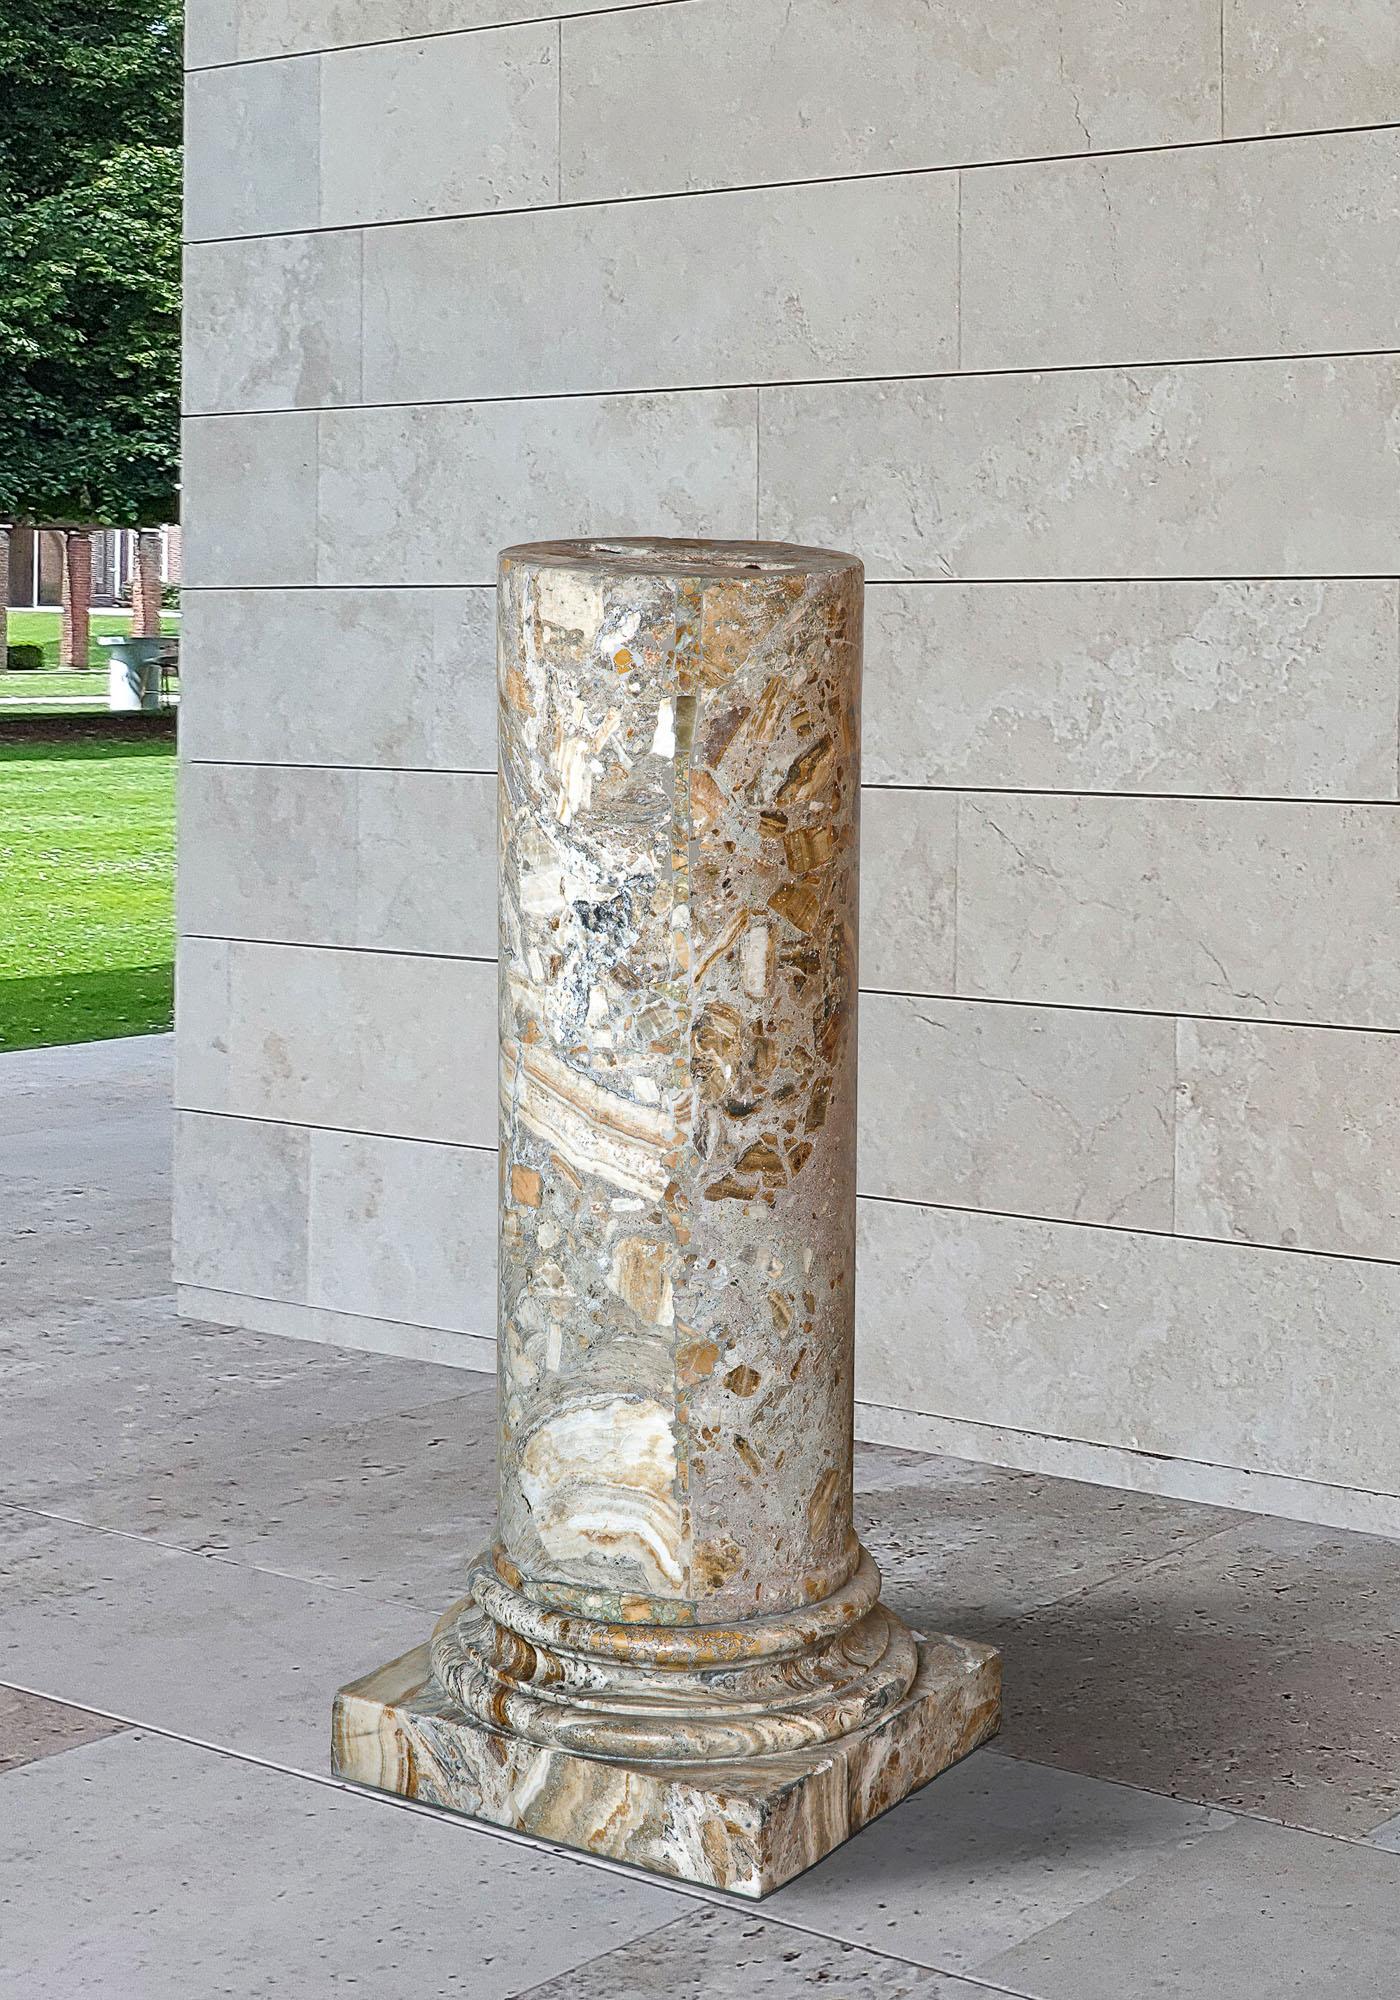 19th Century Italian brecciated marble column or pedestal. The marble is soft yellow pink tones. The base is round with a square base.

h 116 x diameter 33 cm
base: l 46 x w 46 cm